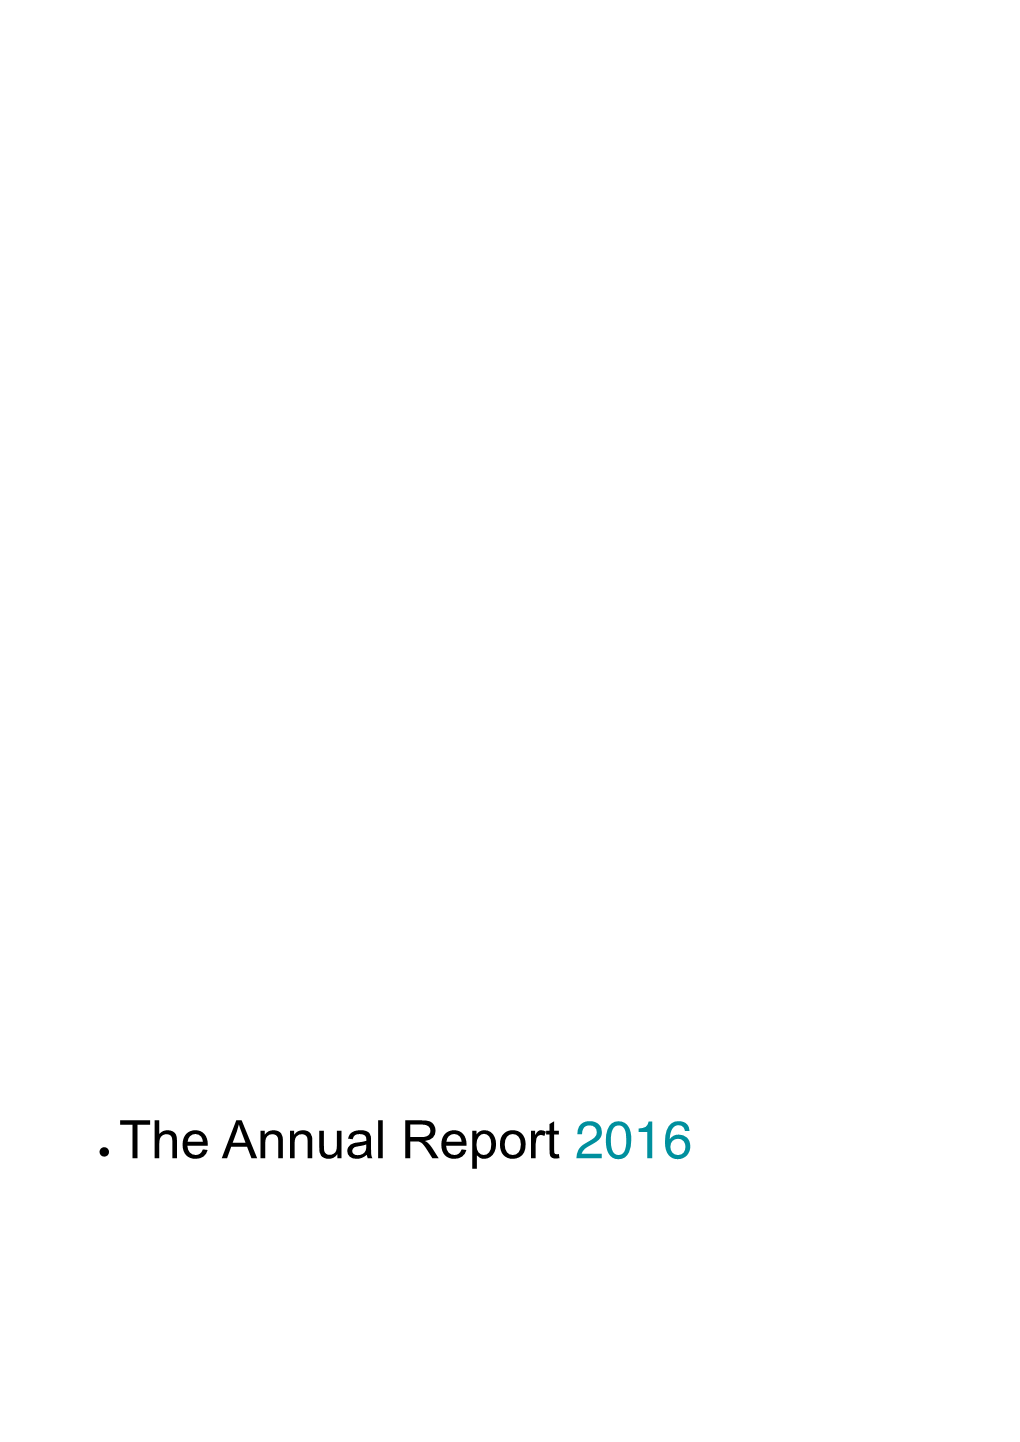 The Annual Report 2016 INDEX